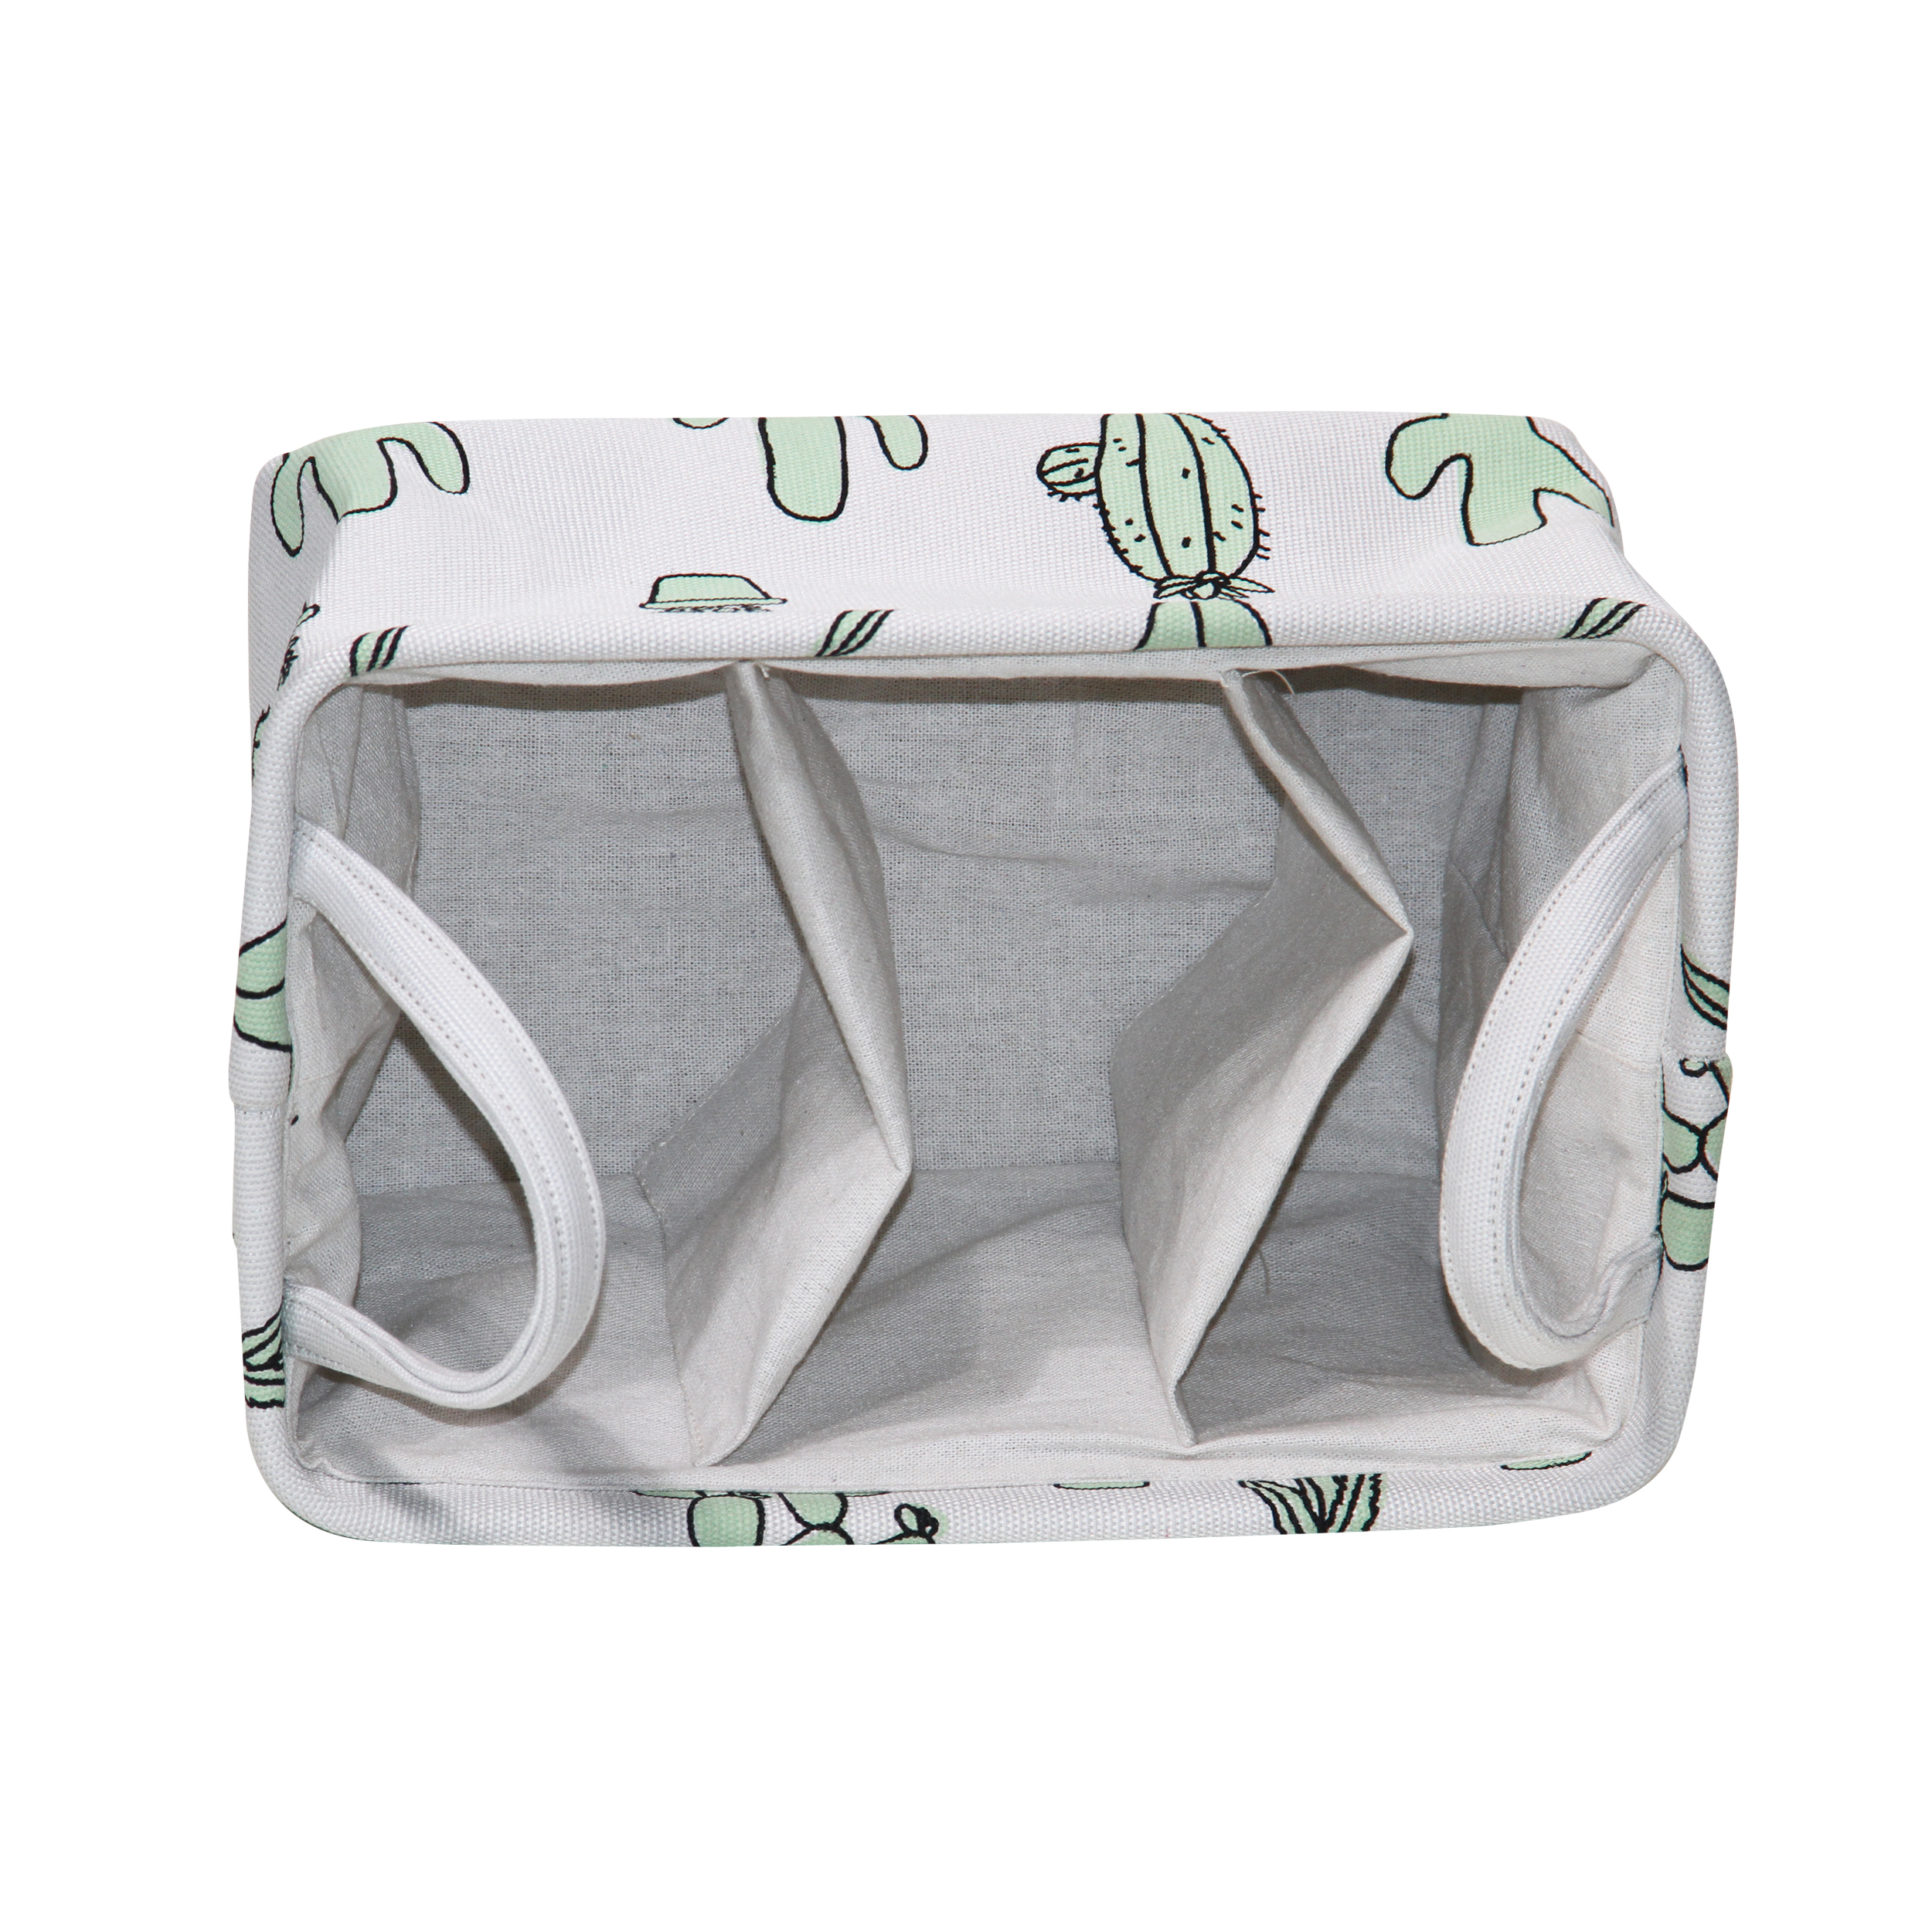 Mainstays Rectangular Collapsible Storage Succulent Fabric Caddy with 2 Dividers - image 3 of 4